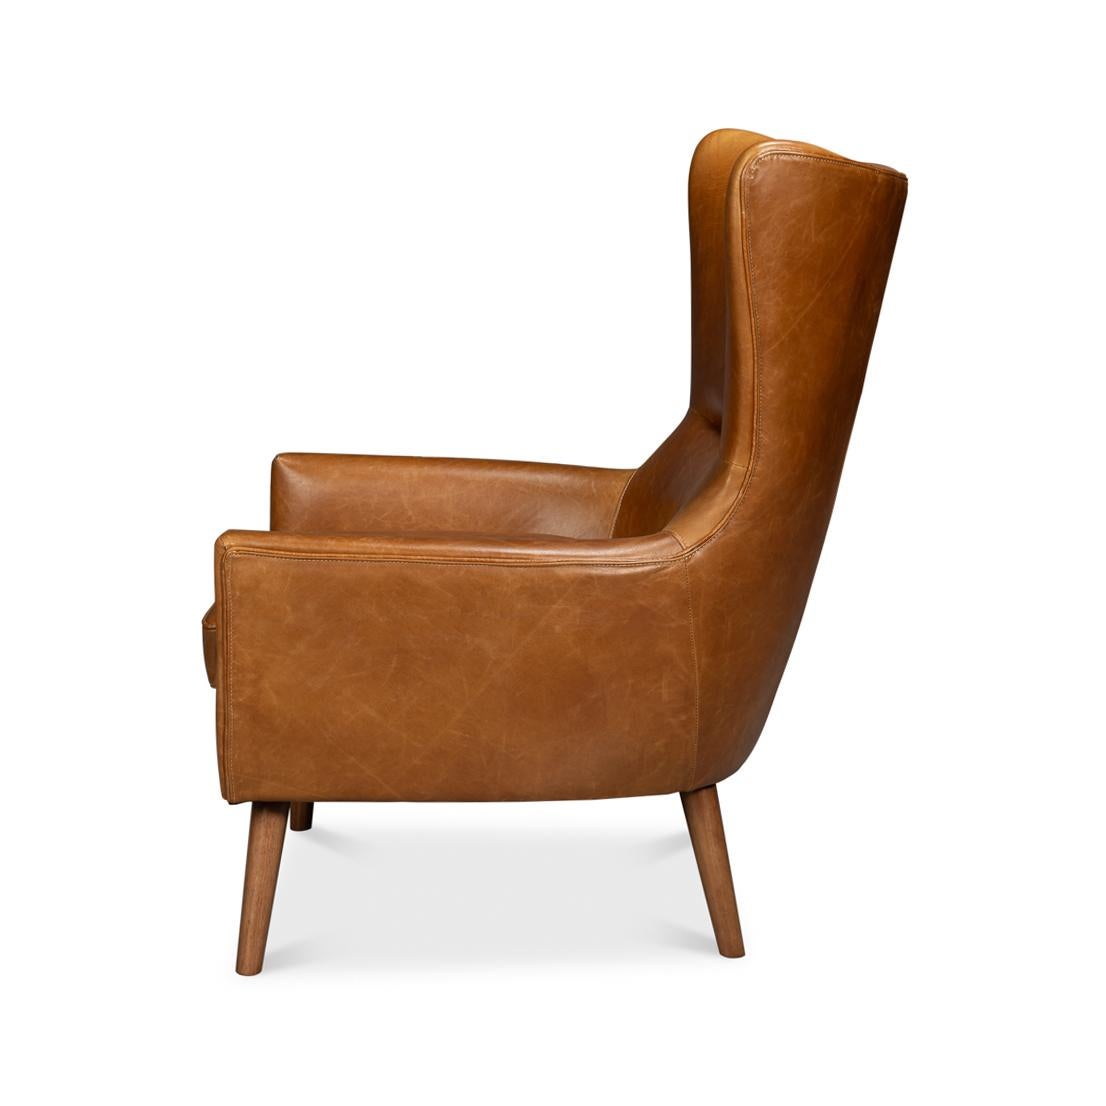 Mid-Century Modern Retro Caramel Leather Wingback Chair For Sale